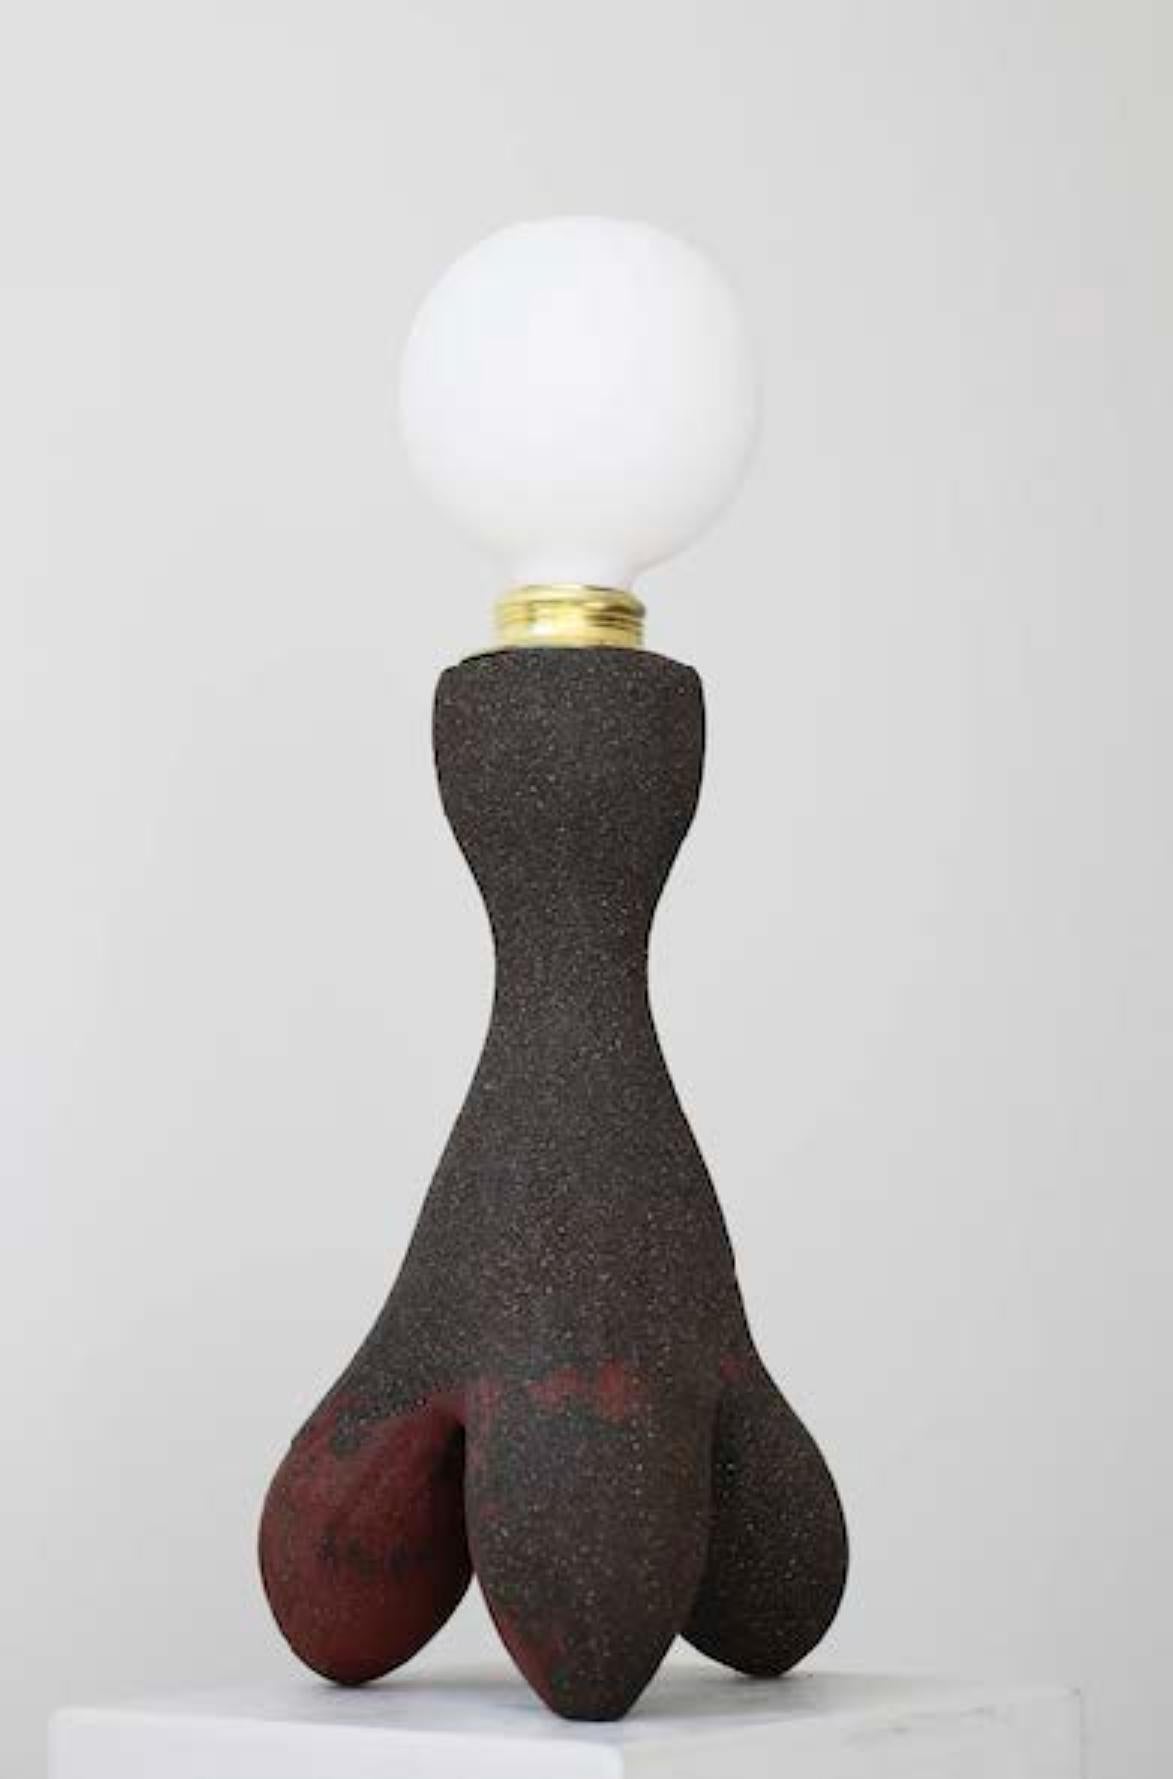 Podo lamp by Abid Javed
Dimensions: D 15 x H 50 cm (dimensions are variable)
Materials: Ceramic 
Available in multiple clay bodies and size options.

Ceramic table lamp base.
Handmade stoneware ceramic lamp base. Coiled hollow form with a